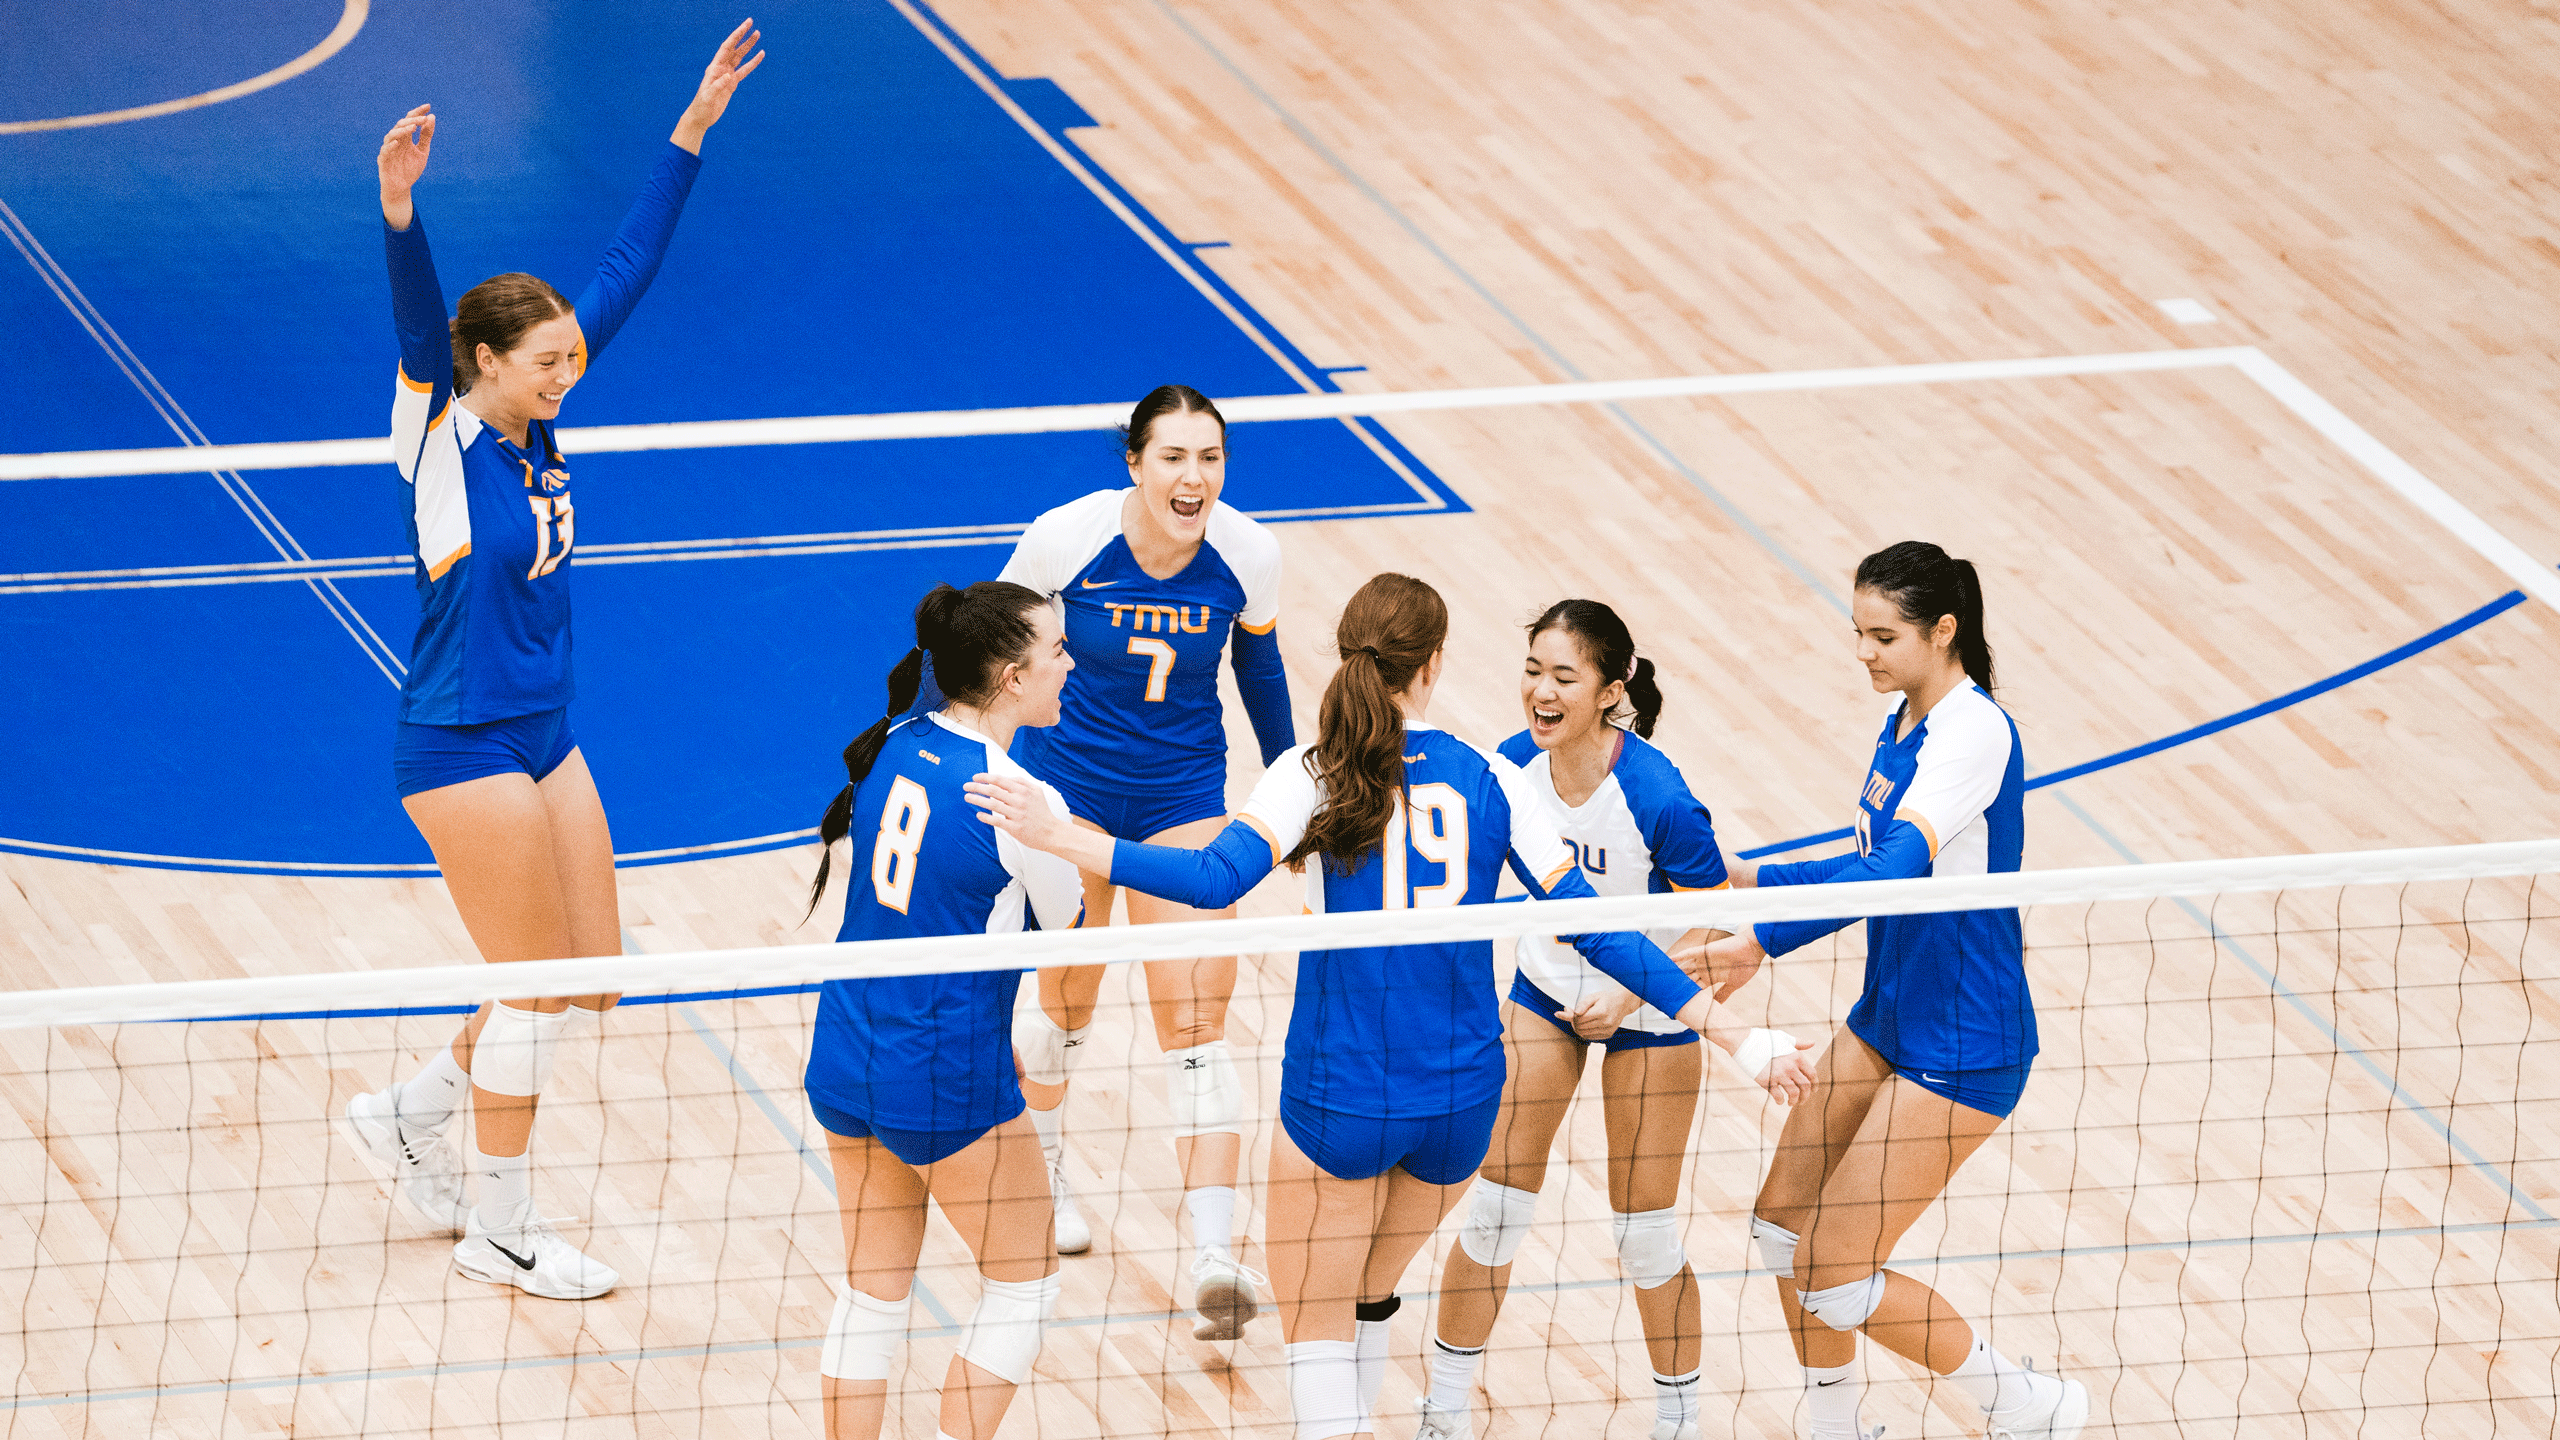 A group of volleyball players in blue jerseys celebrate